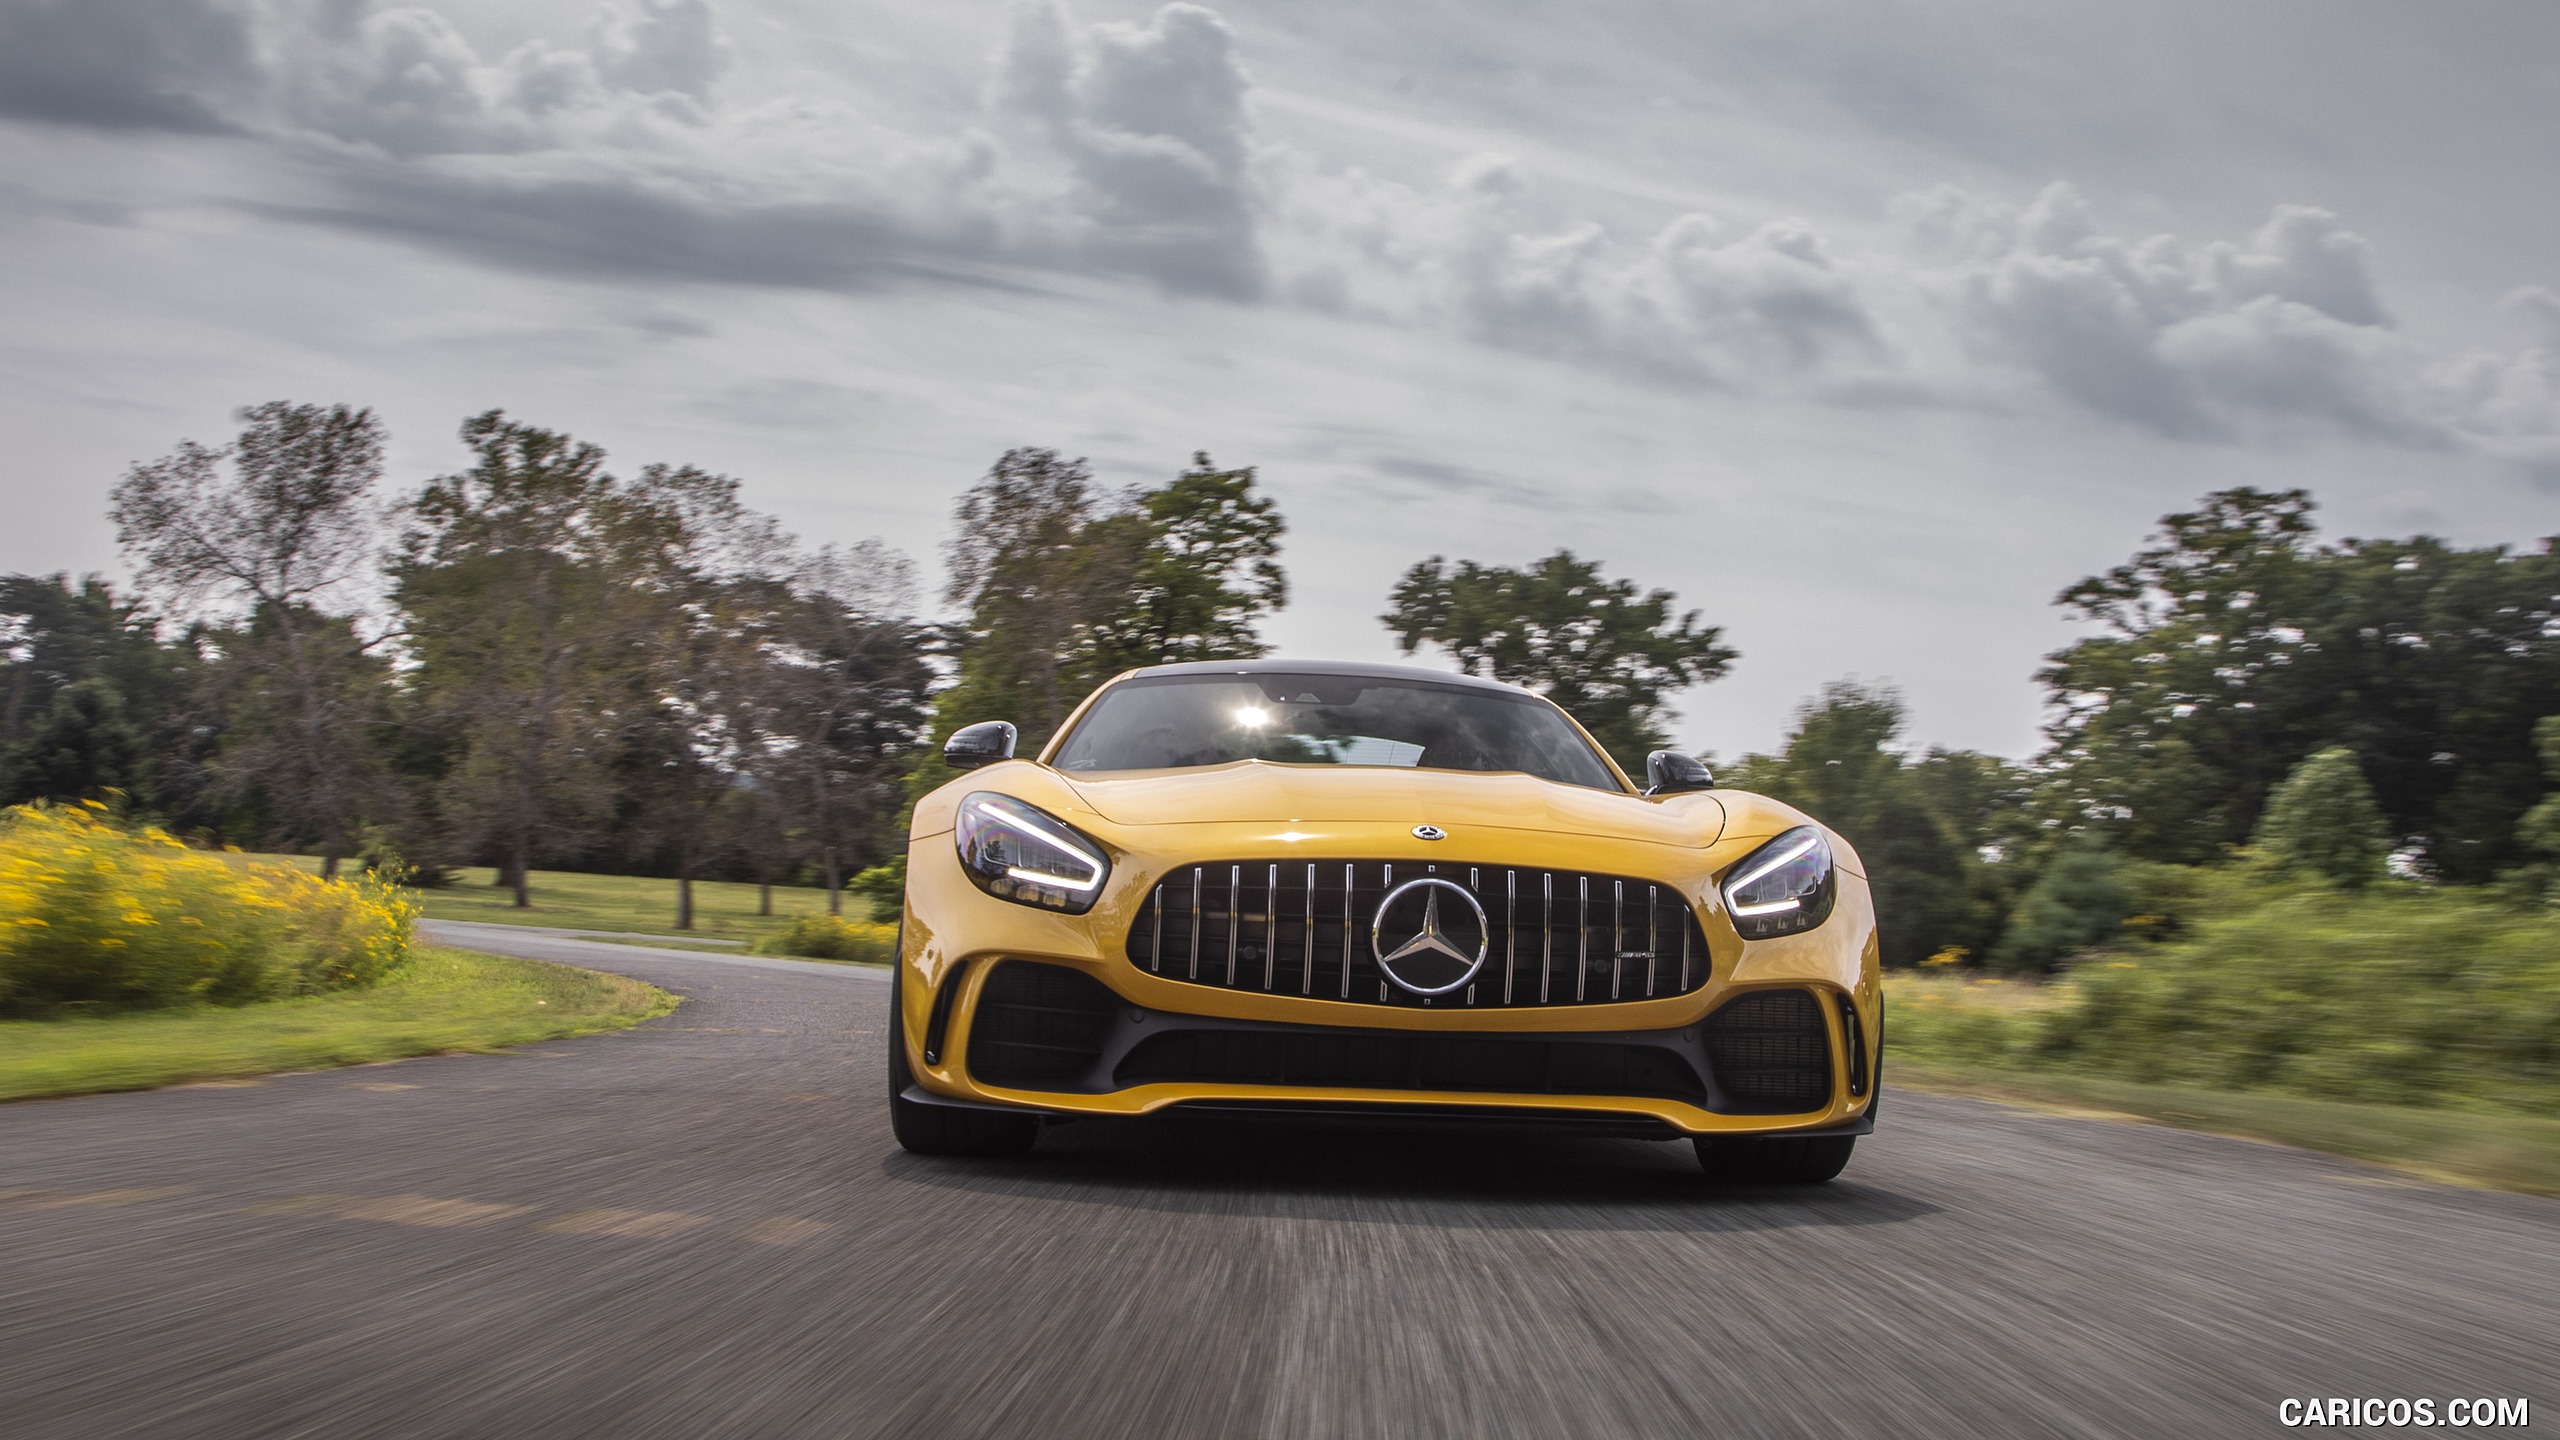 2020 Mercedes-AMG GT R Coupe (US-Spec) - Front, #258 of 328